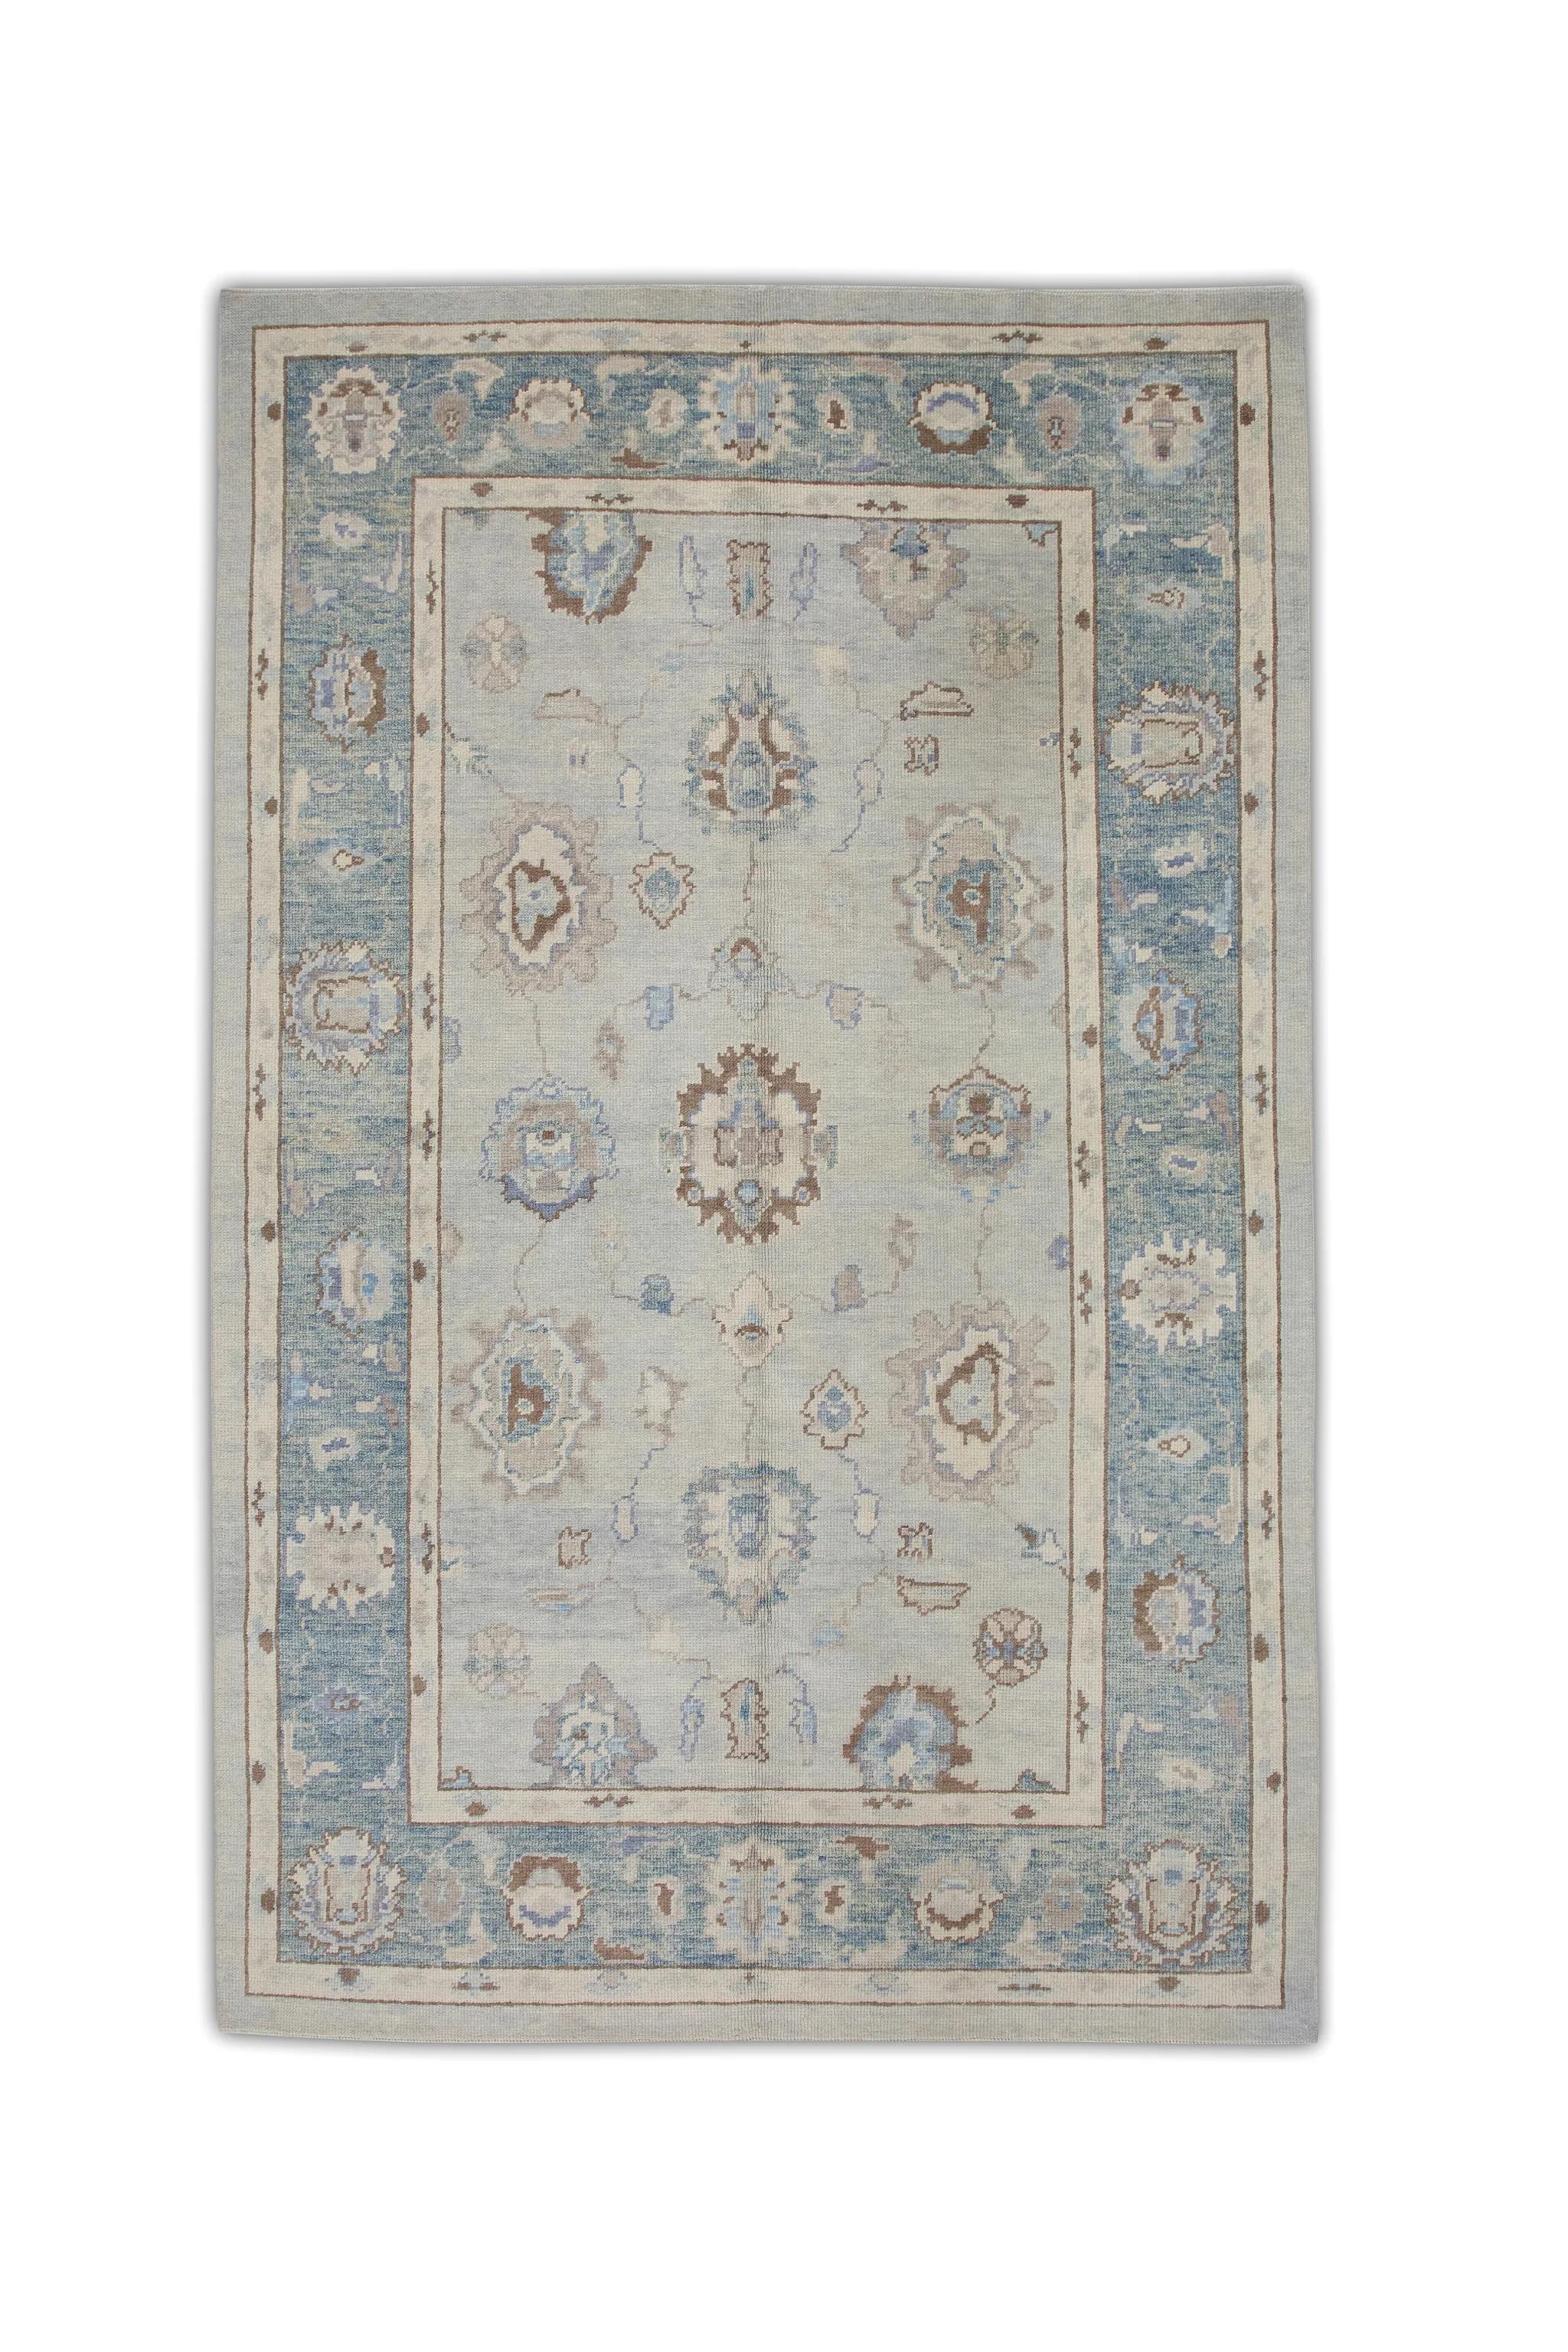 Blue and Brown Handwoven Wool Turkish Oushak Rug in Floral Pattern 6' x 9'1